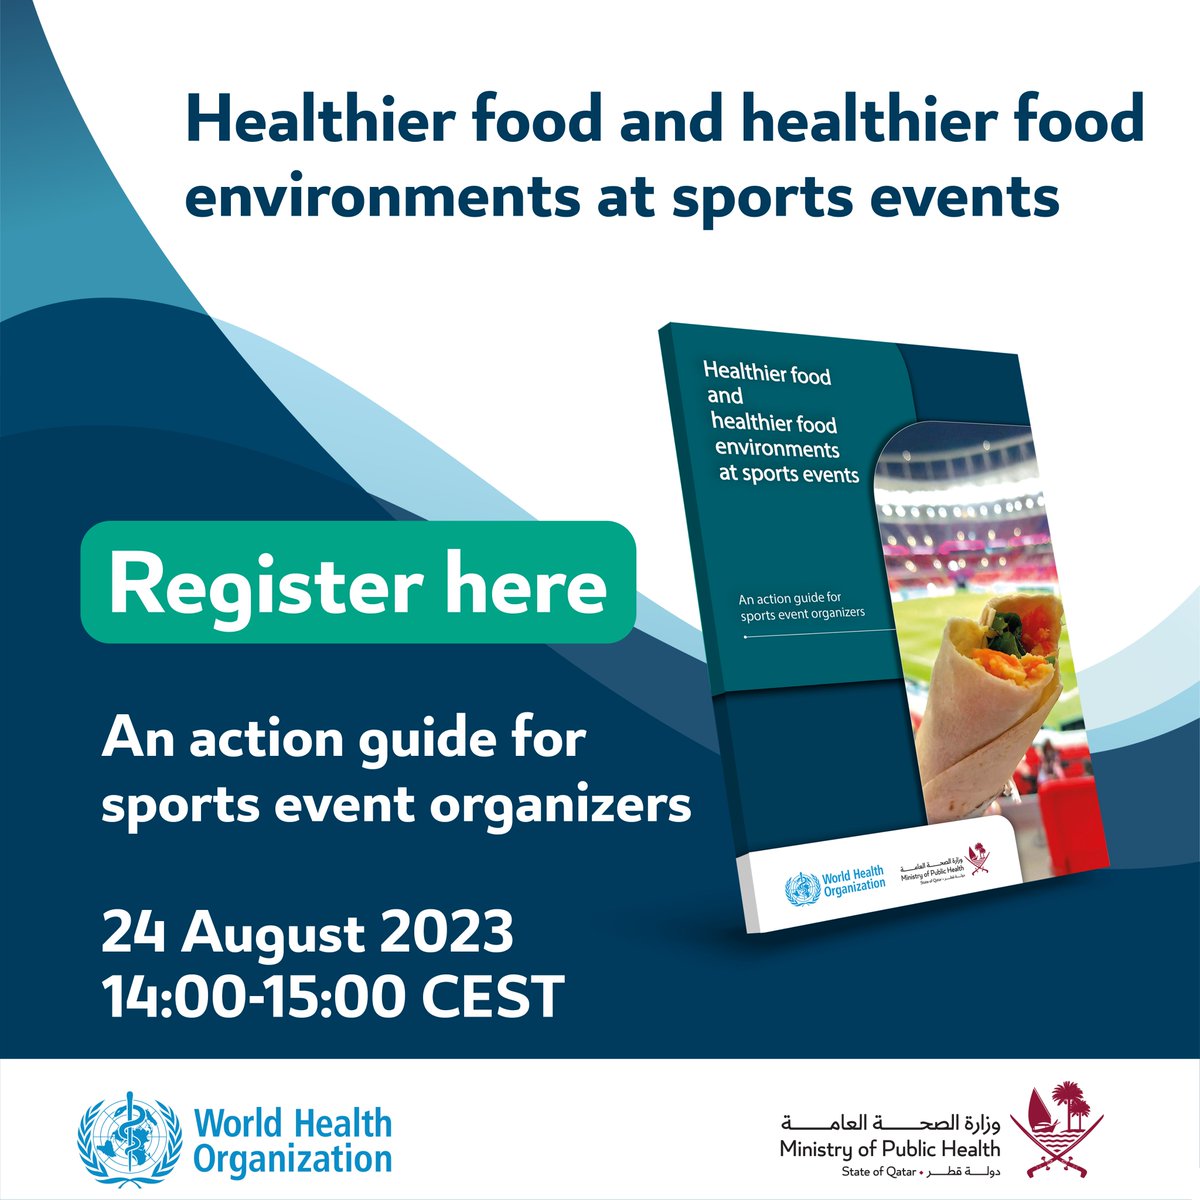 Don’t miss out! New action guide ‘Healthier food and healthier food environments at sports events’, out today 24 August.  Learn more here: tinyurl.com/3ry3wykz
· #FoodSystems #Sport4Health #HealthForAll